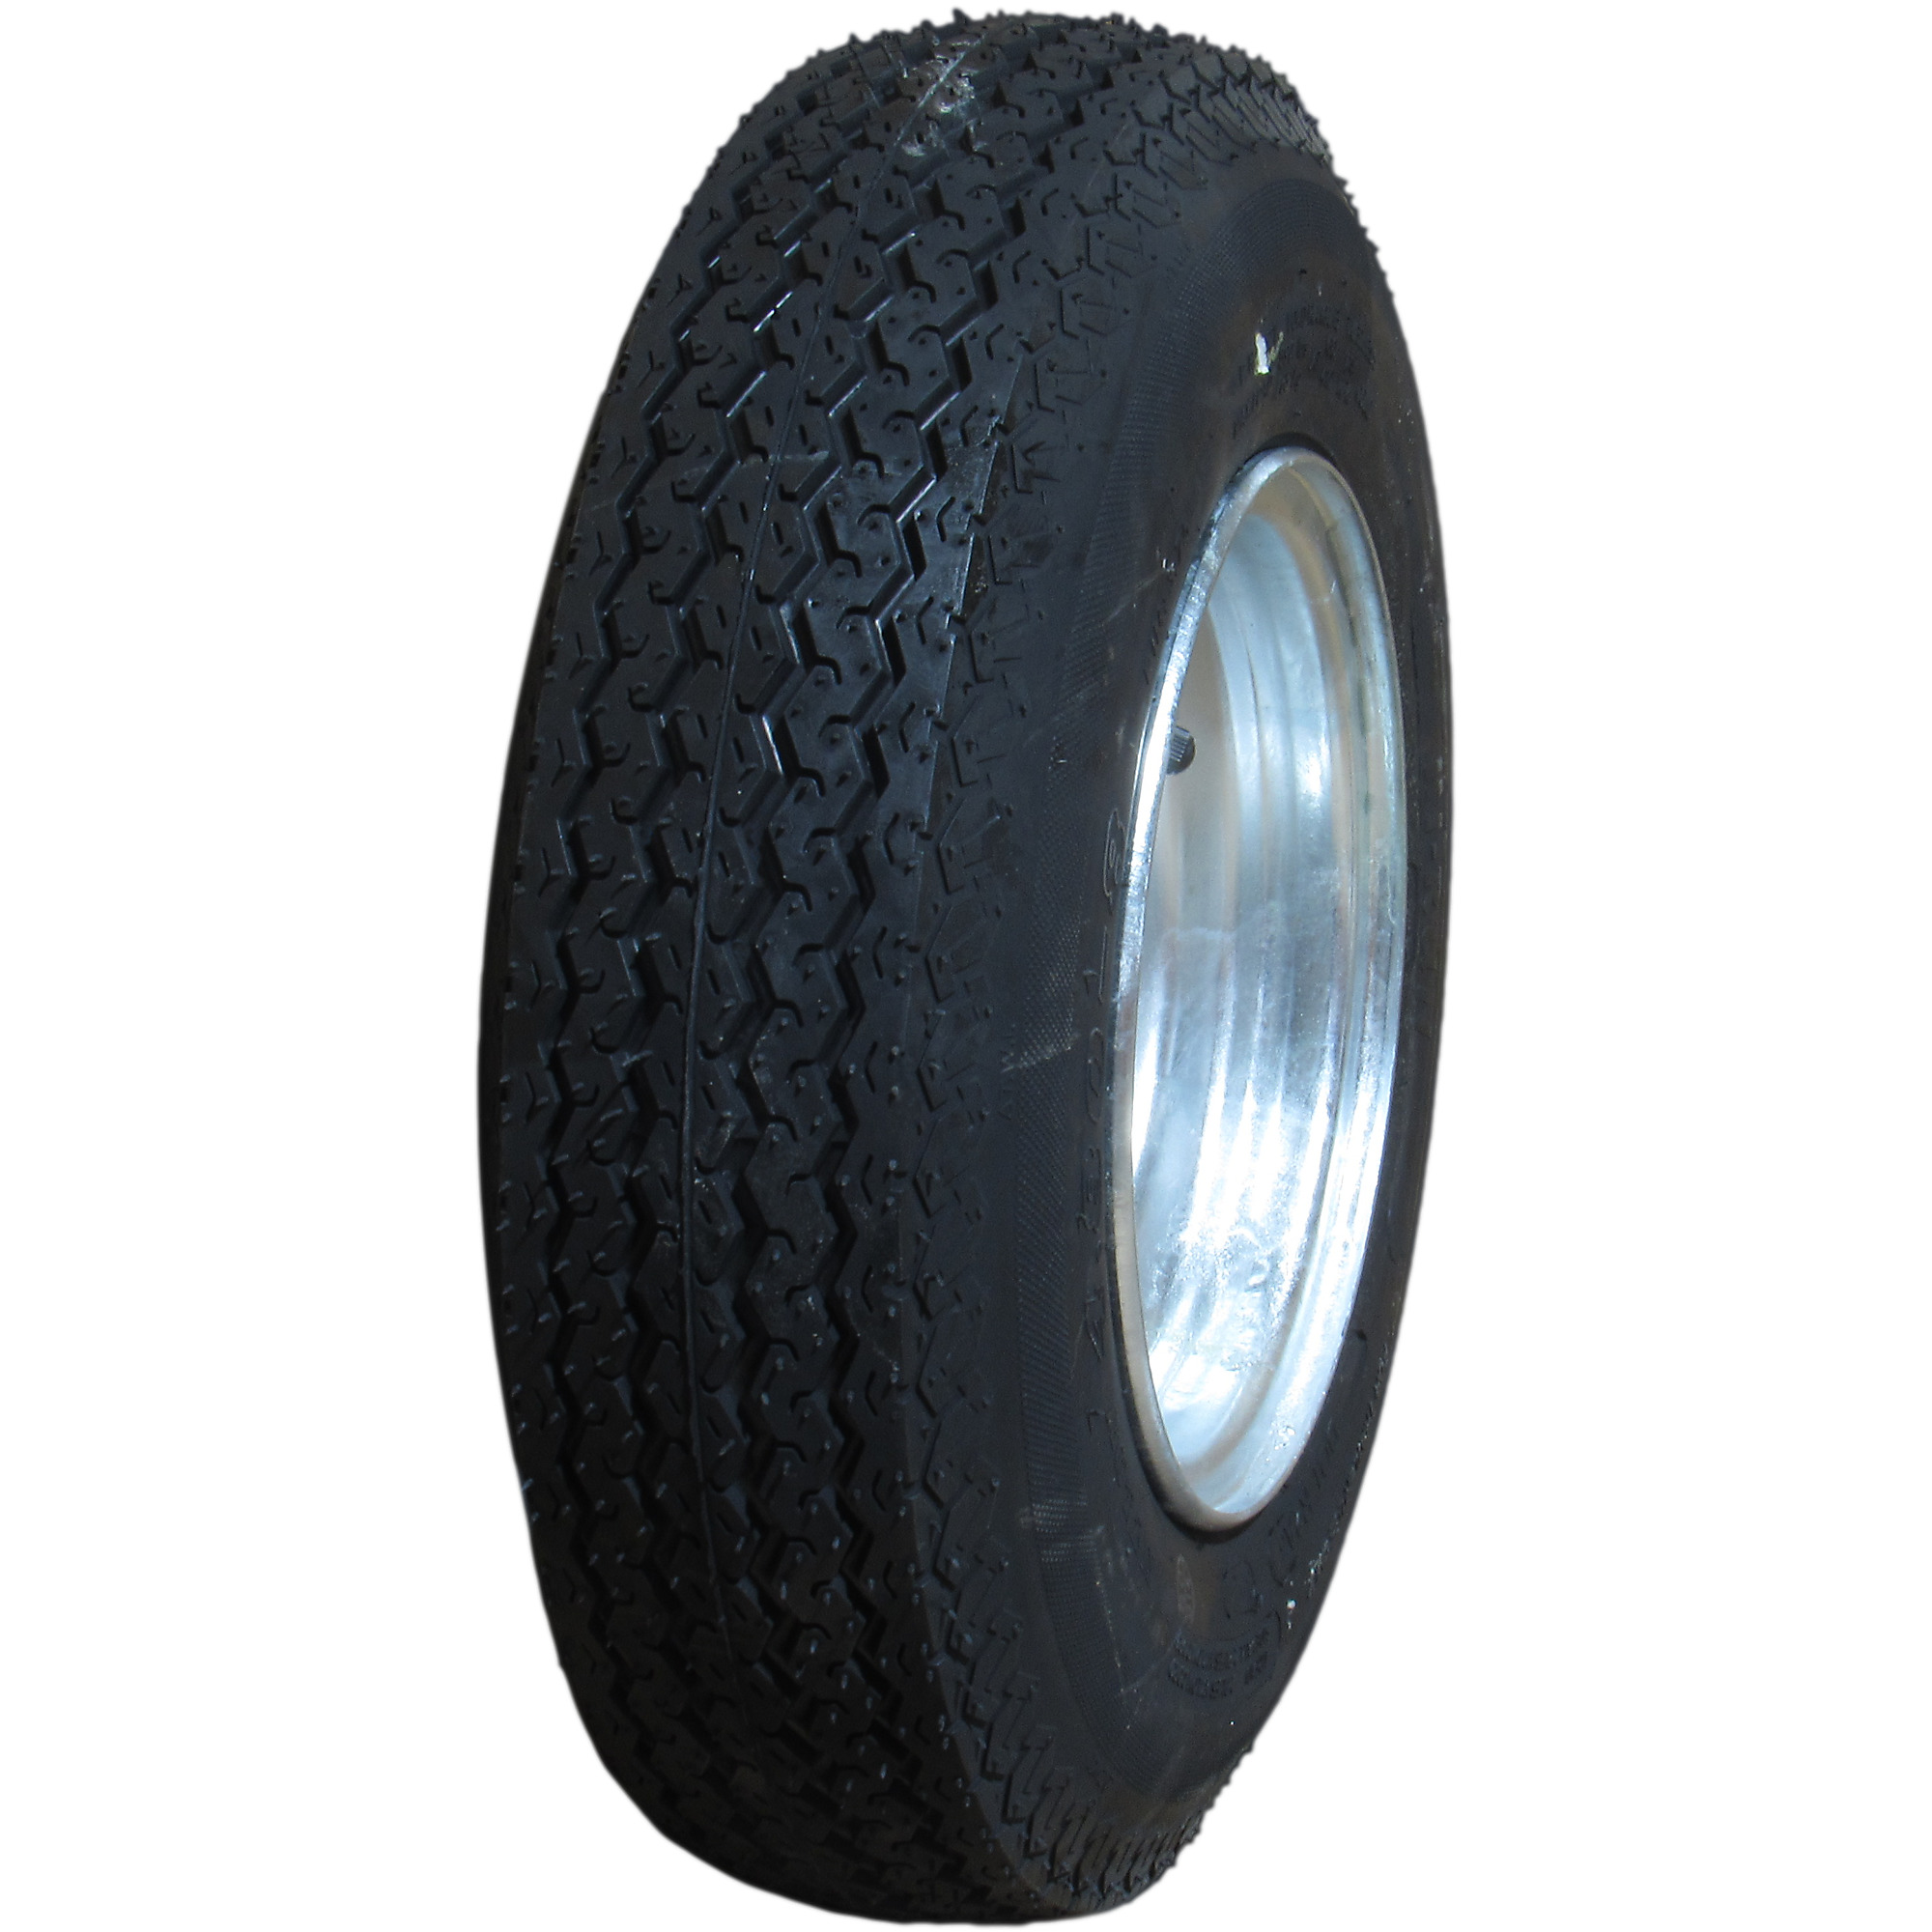 HI-RUN, Highway Trailer Tire Assembly, Galvanized, Tire Size 4.80-8 Load Range Rating B, Bolt Holes (qty.) 4 Model ASB1060